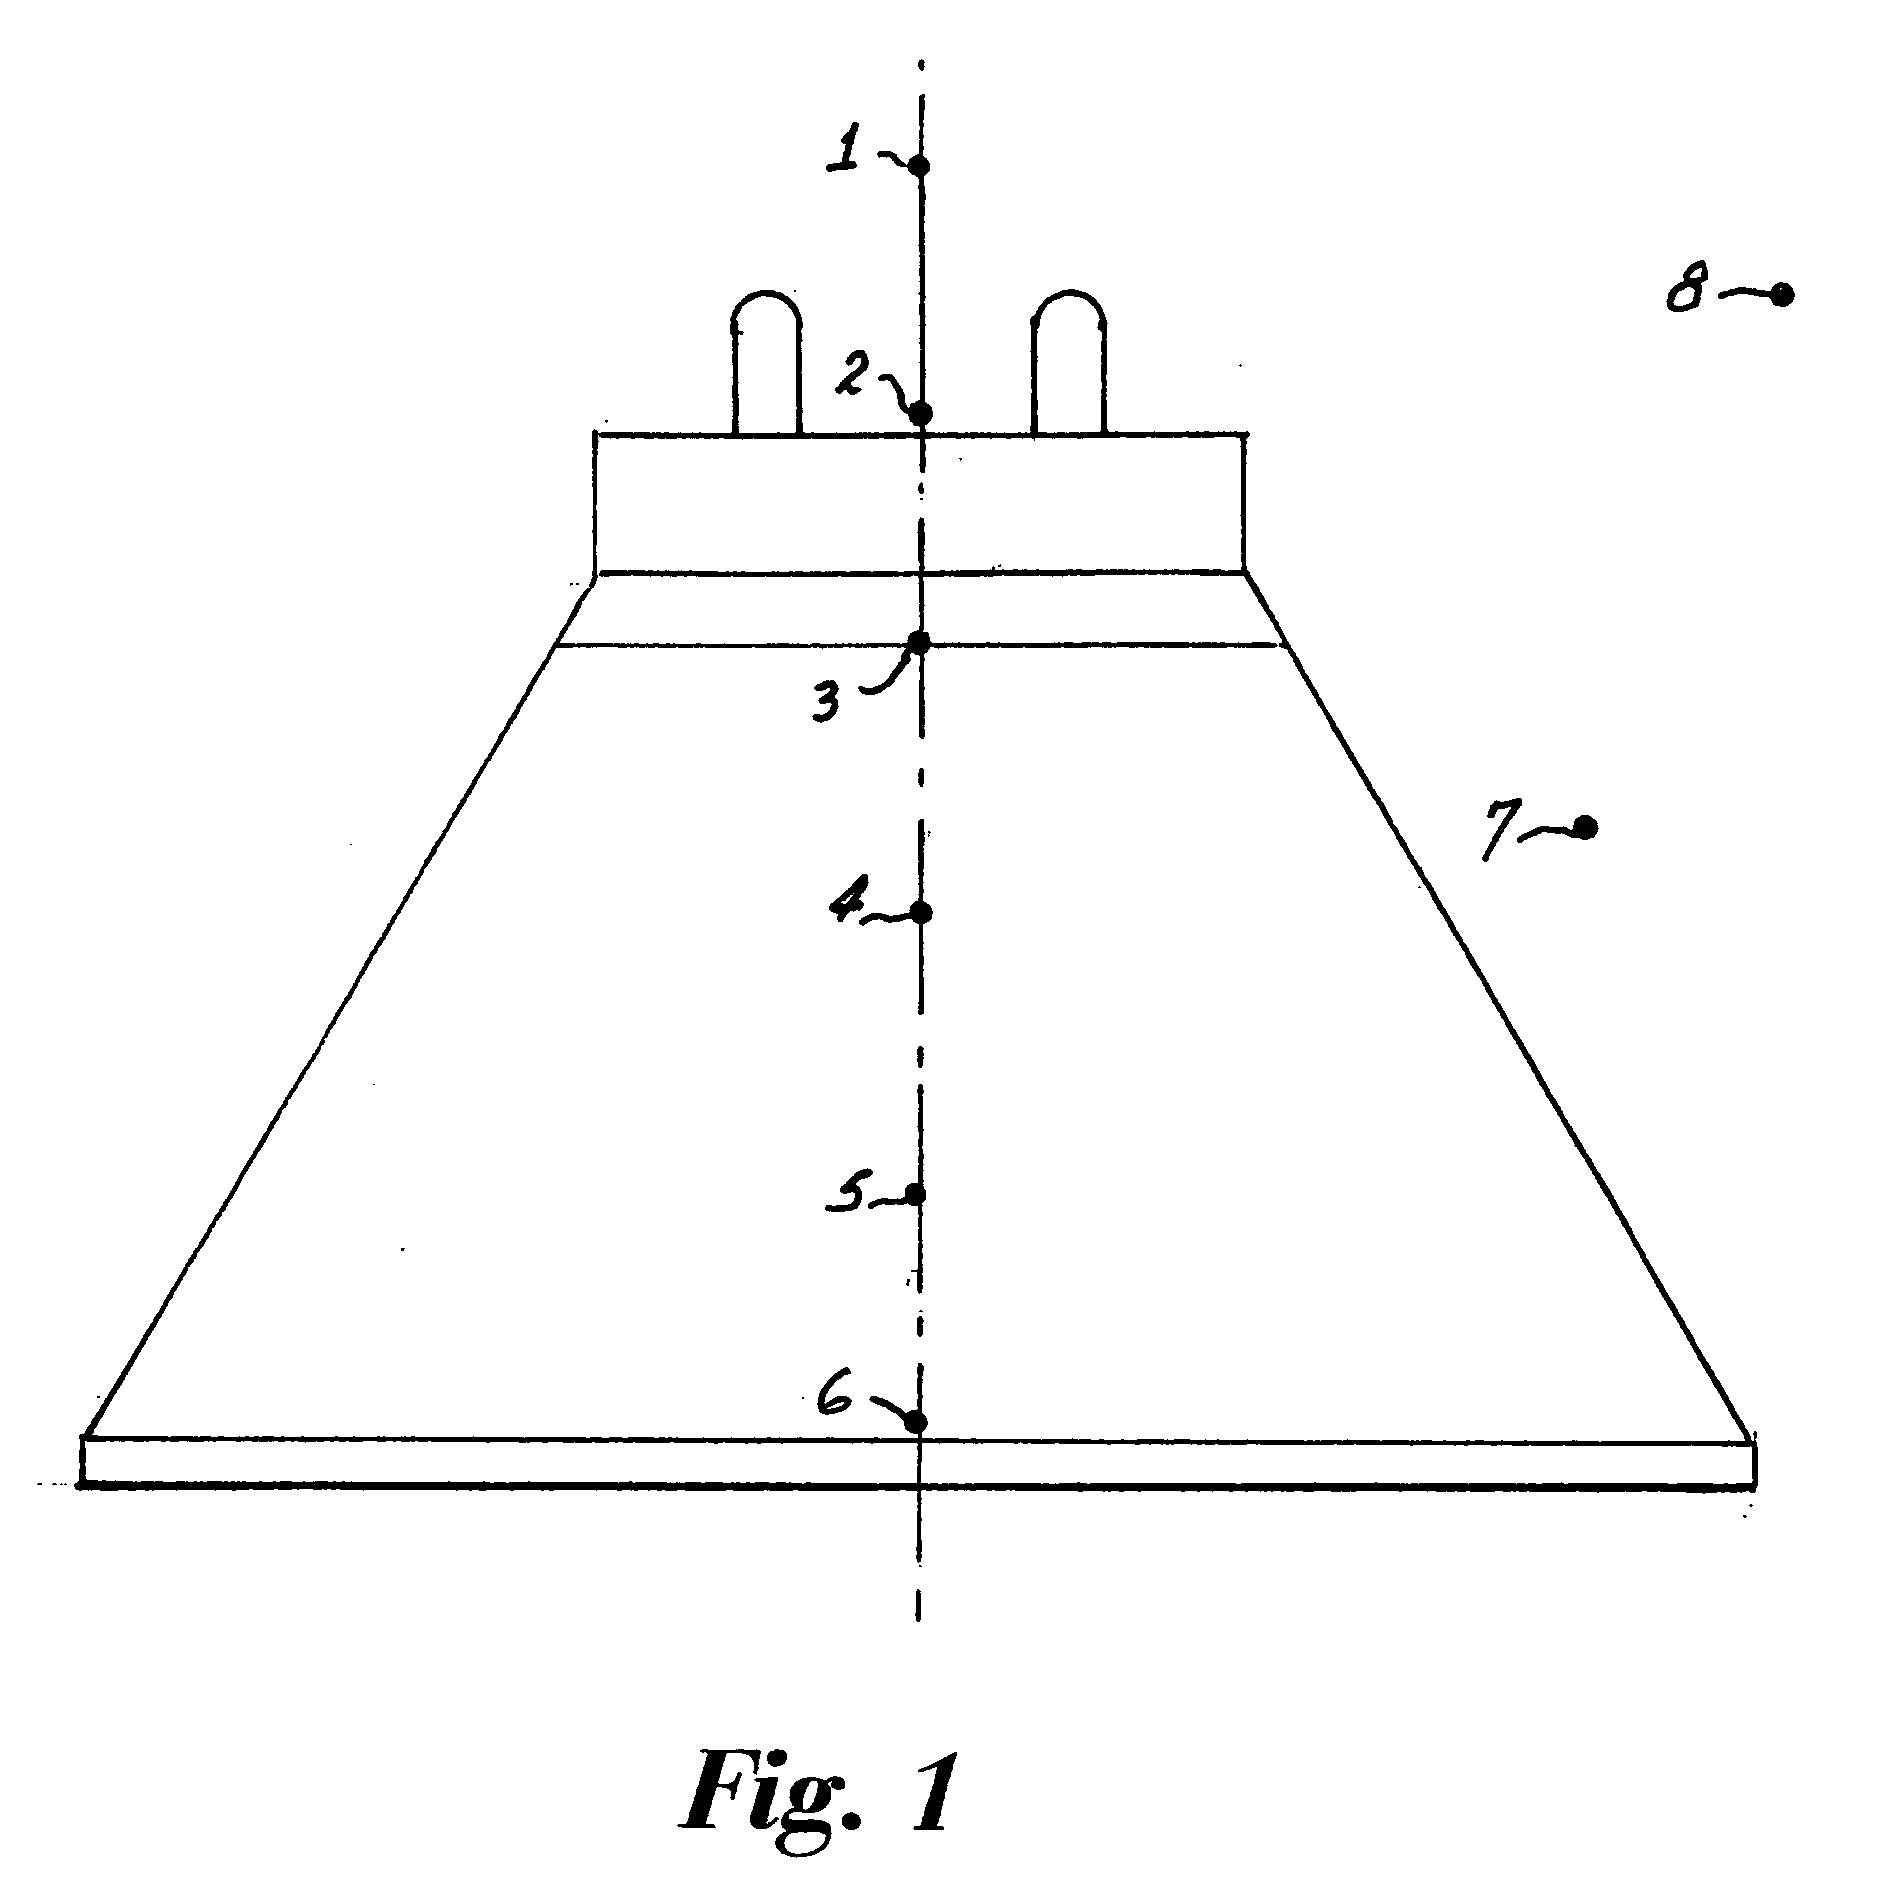 Lamp with integral power supply